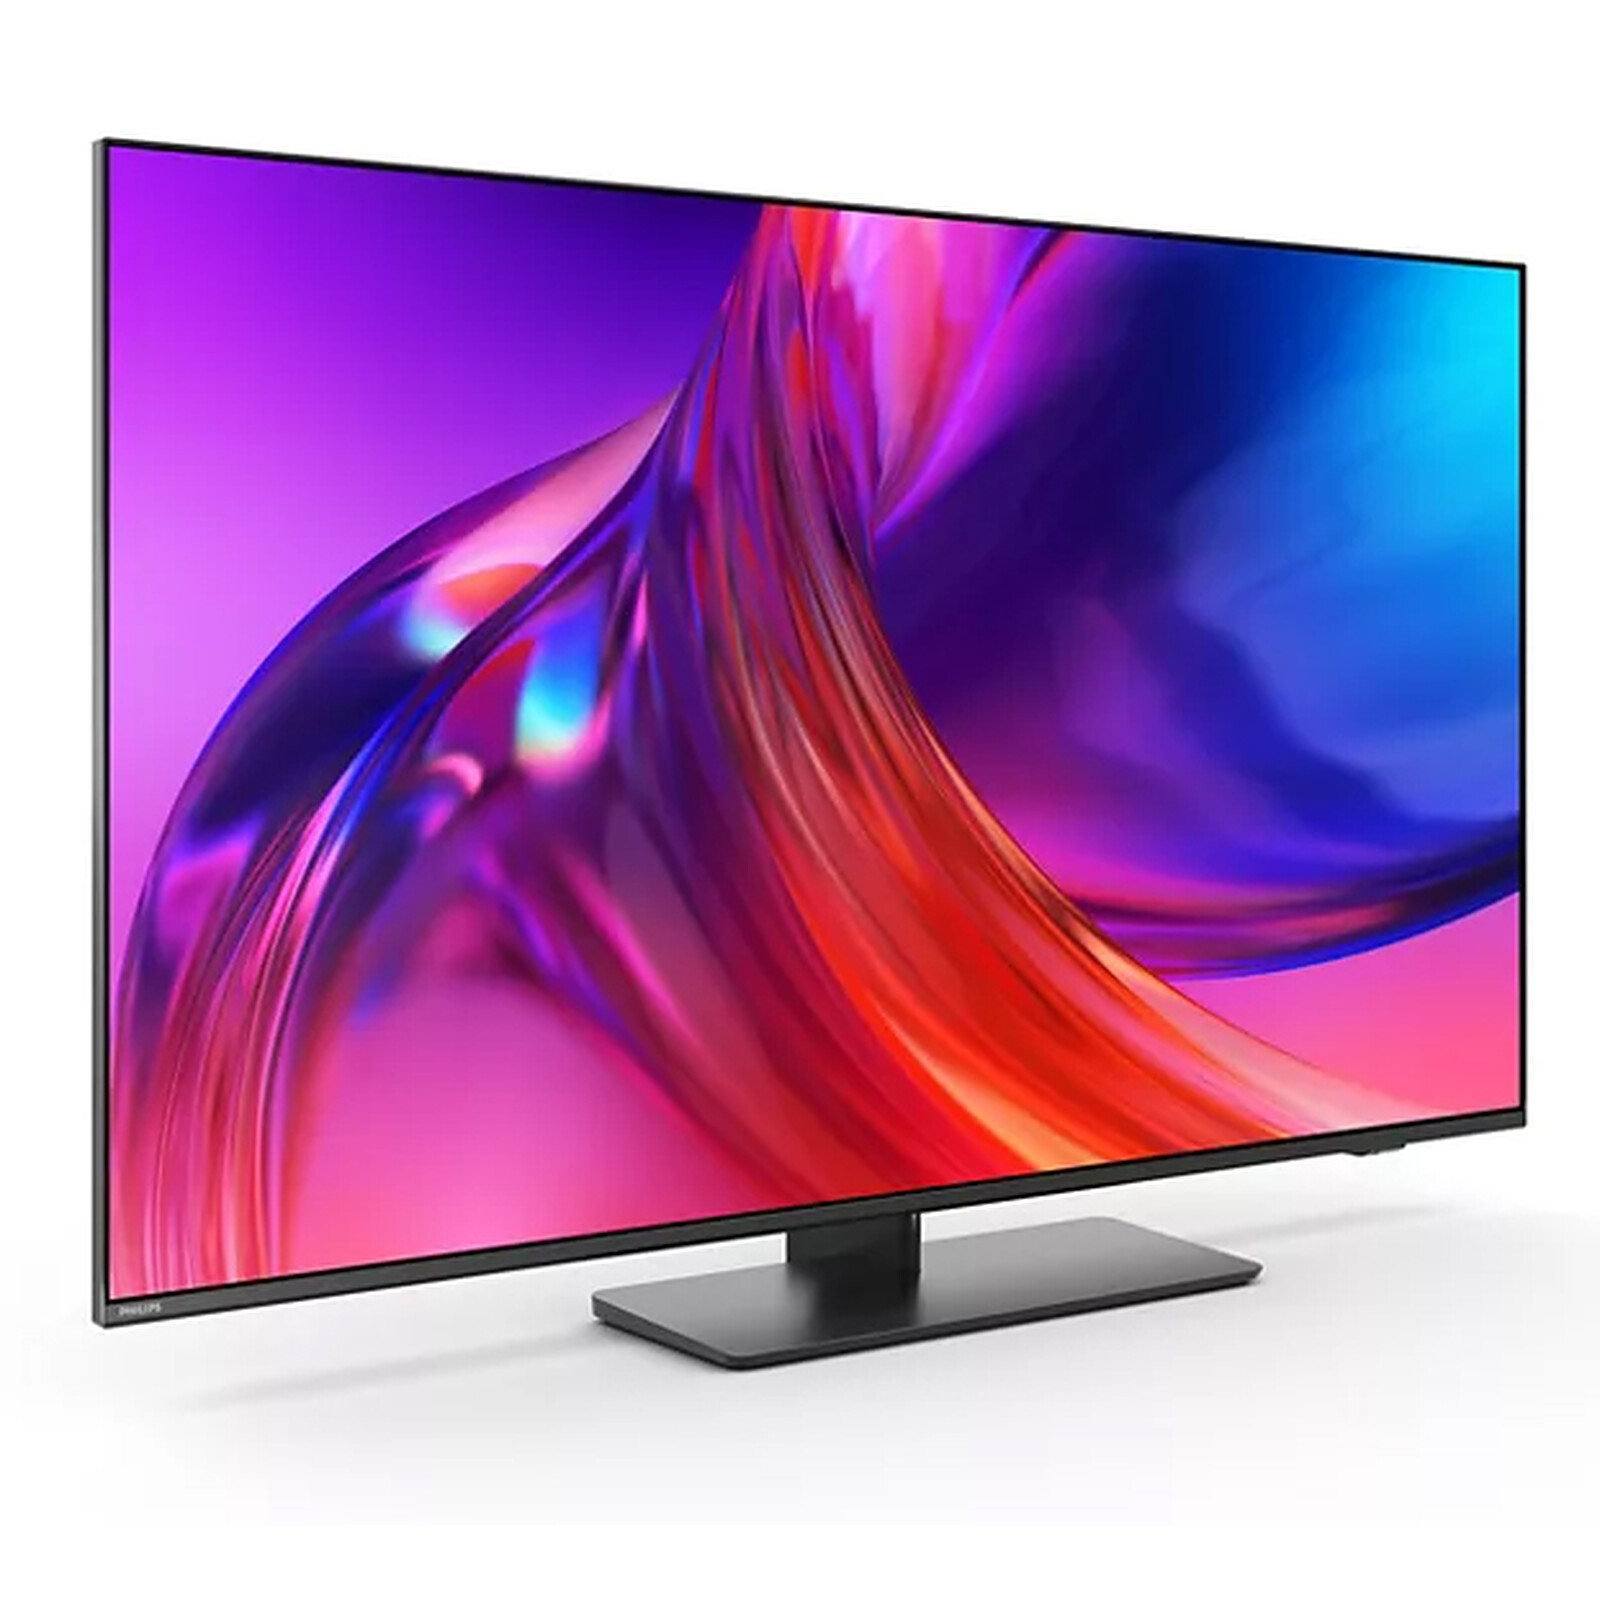 The One 4K Ambilight TV 43PUS8808/12